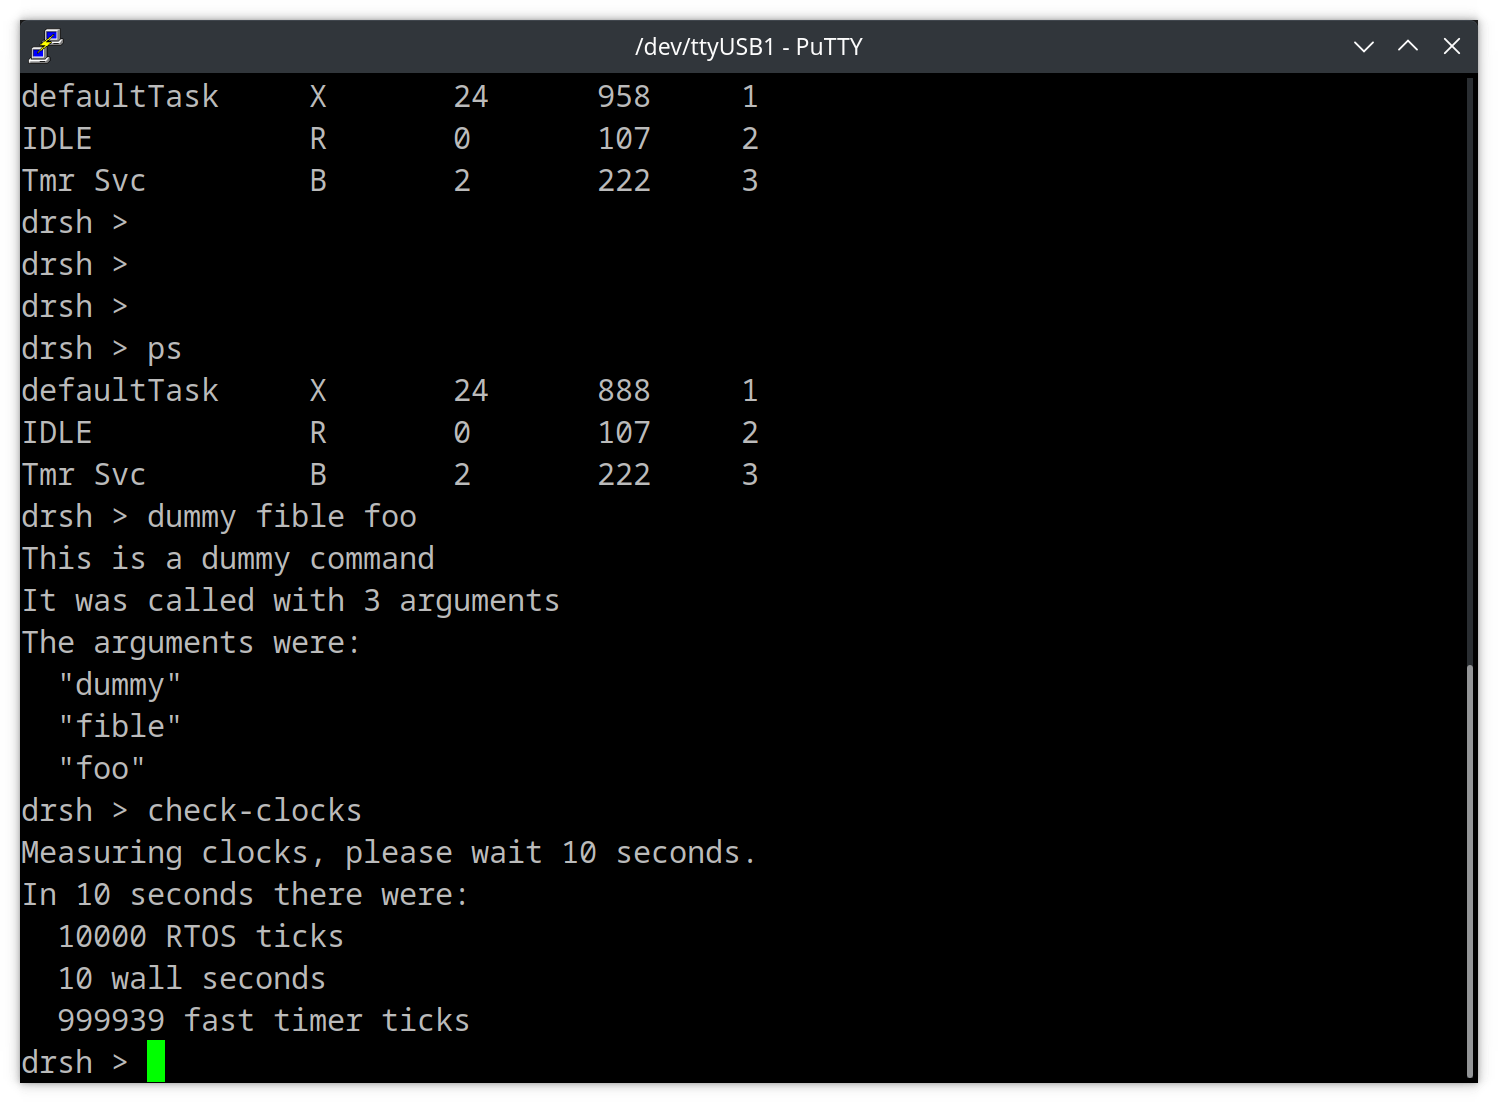 A set of simple commands showing clock ticks and process status in a Putty window.